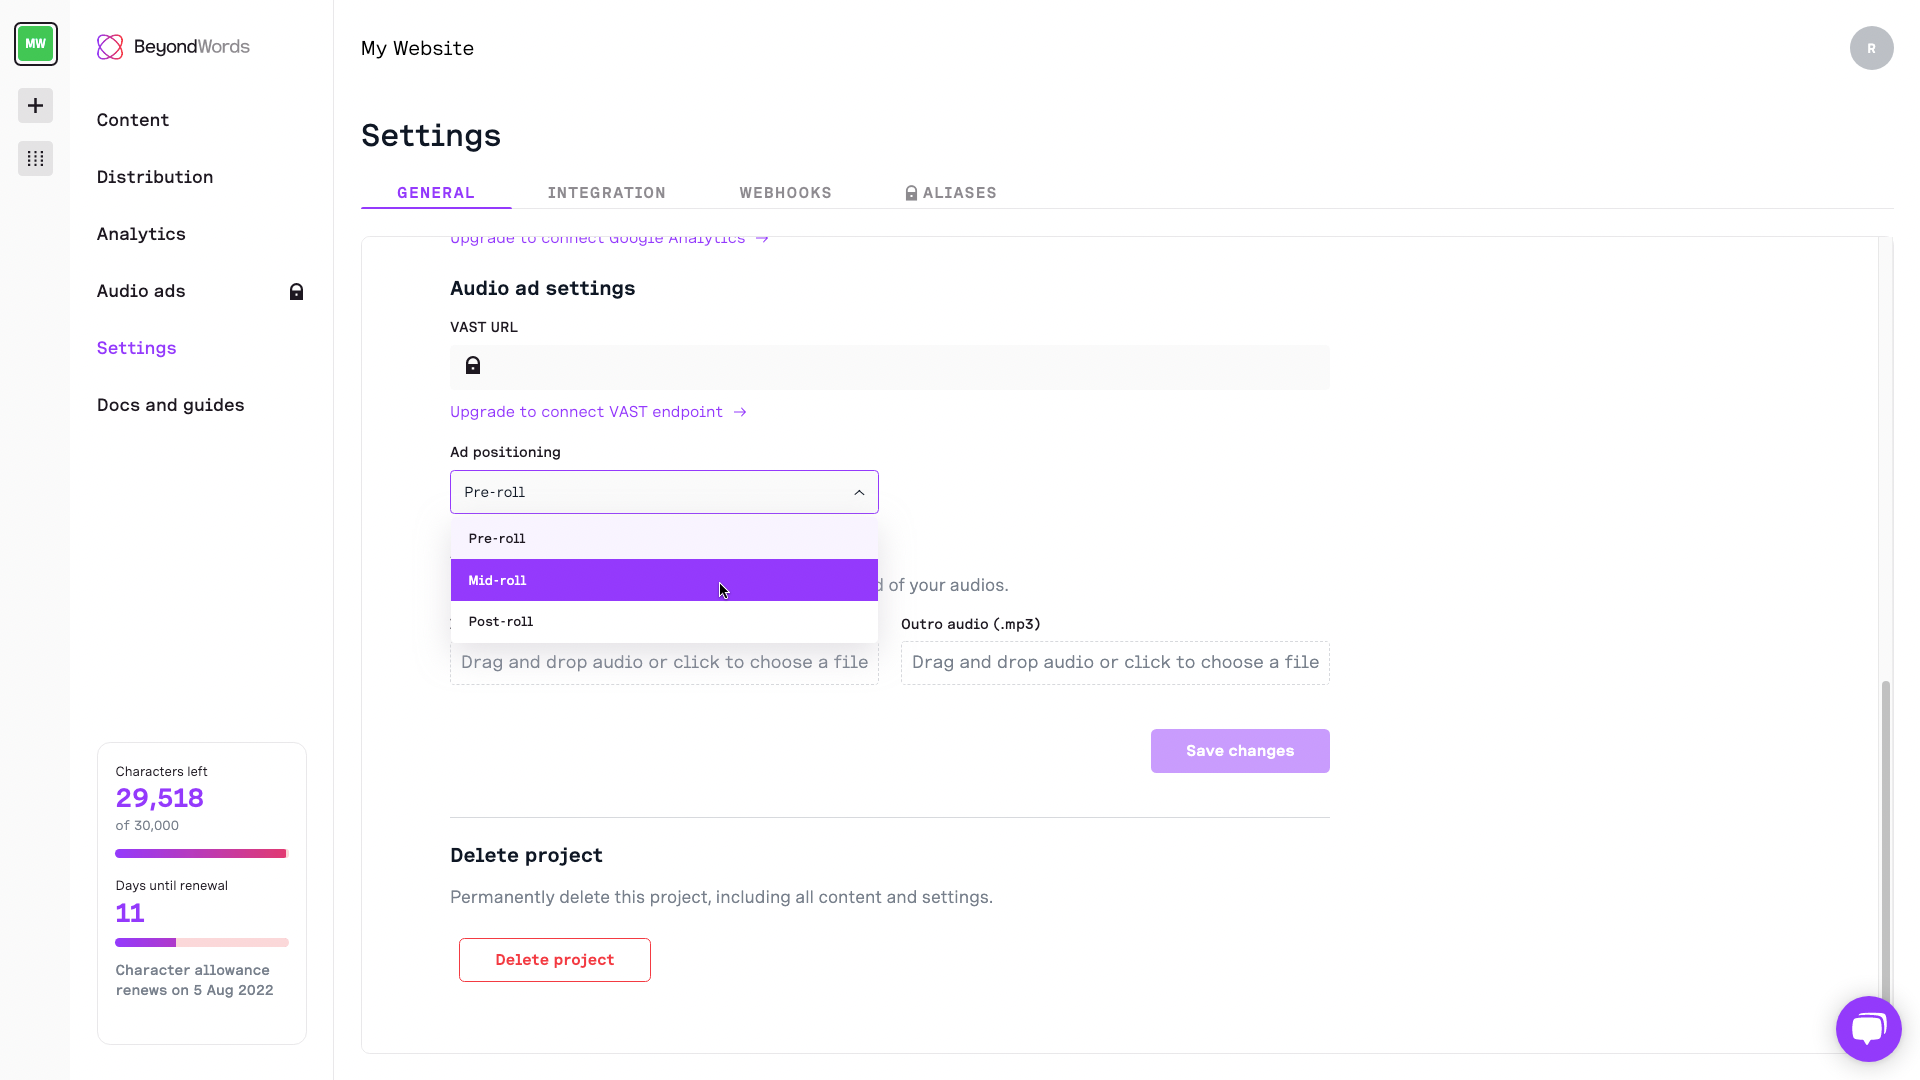 Changelog: Aliases, pending review, ad positioning & more